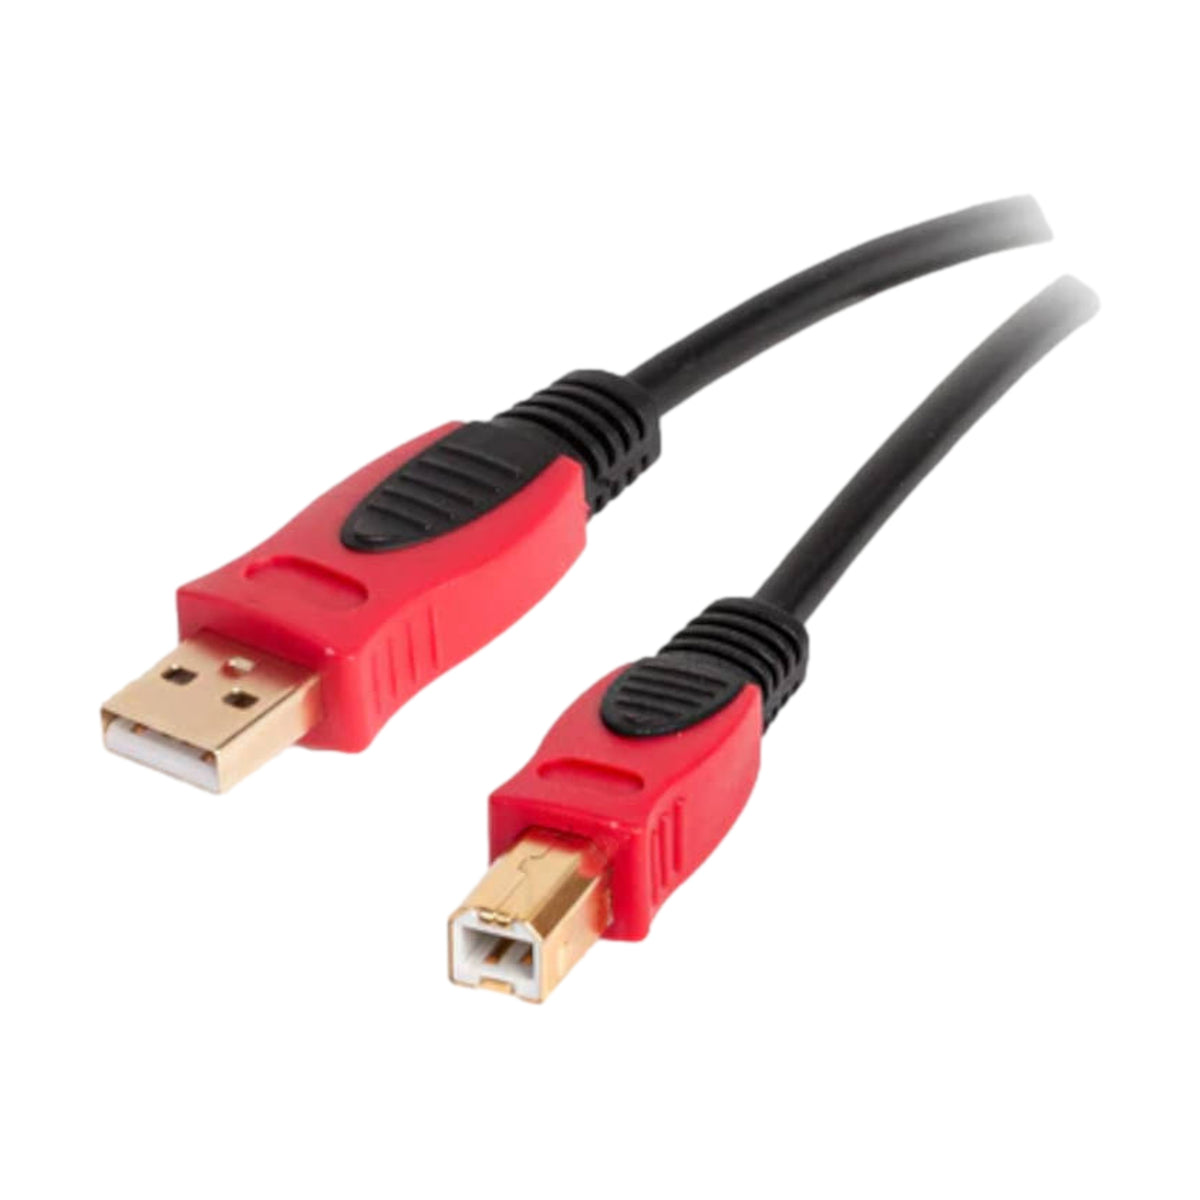 Australasian USB 2.0 Type A to USB Type B 10ft Cable